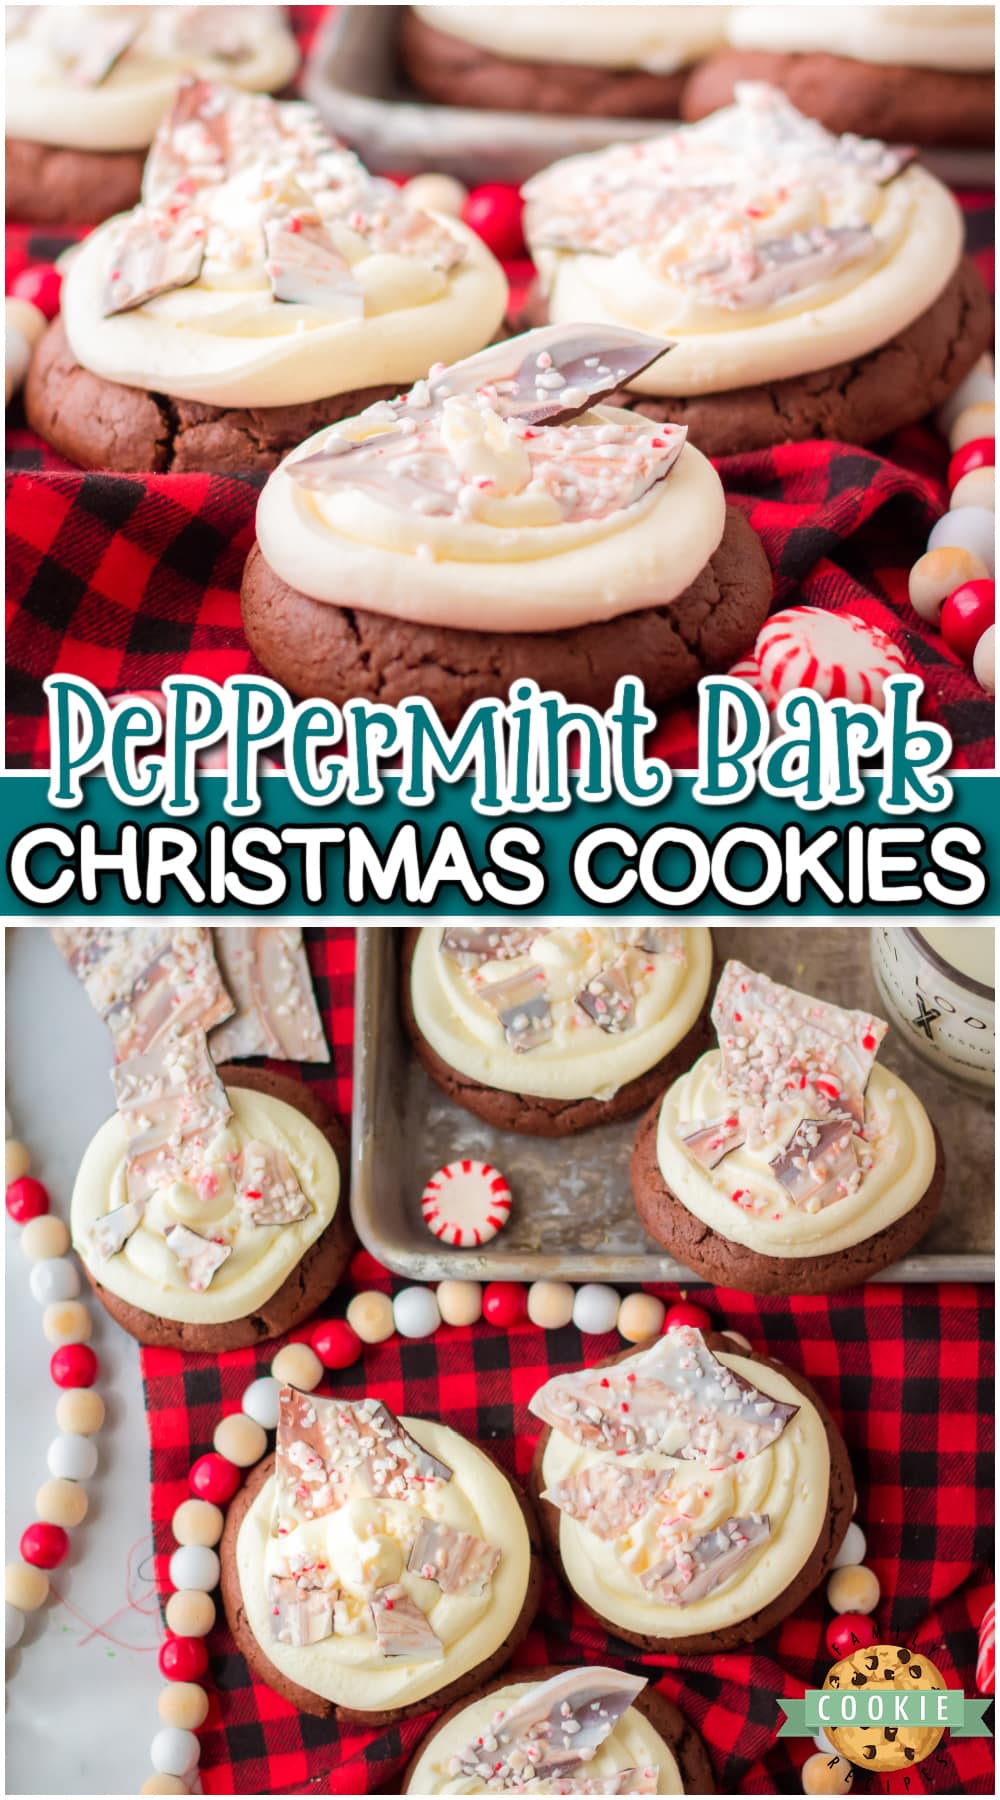 Peppermint Bark Cookies are the ultimate Christmas cookies, a sensational holiday dessert! These peppermint cookies are bakery-style chocolate cookies topped with peppermint buttercream & homemade peppermint bark!